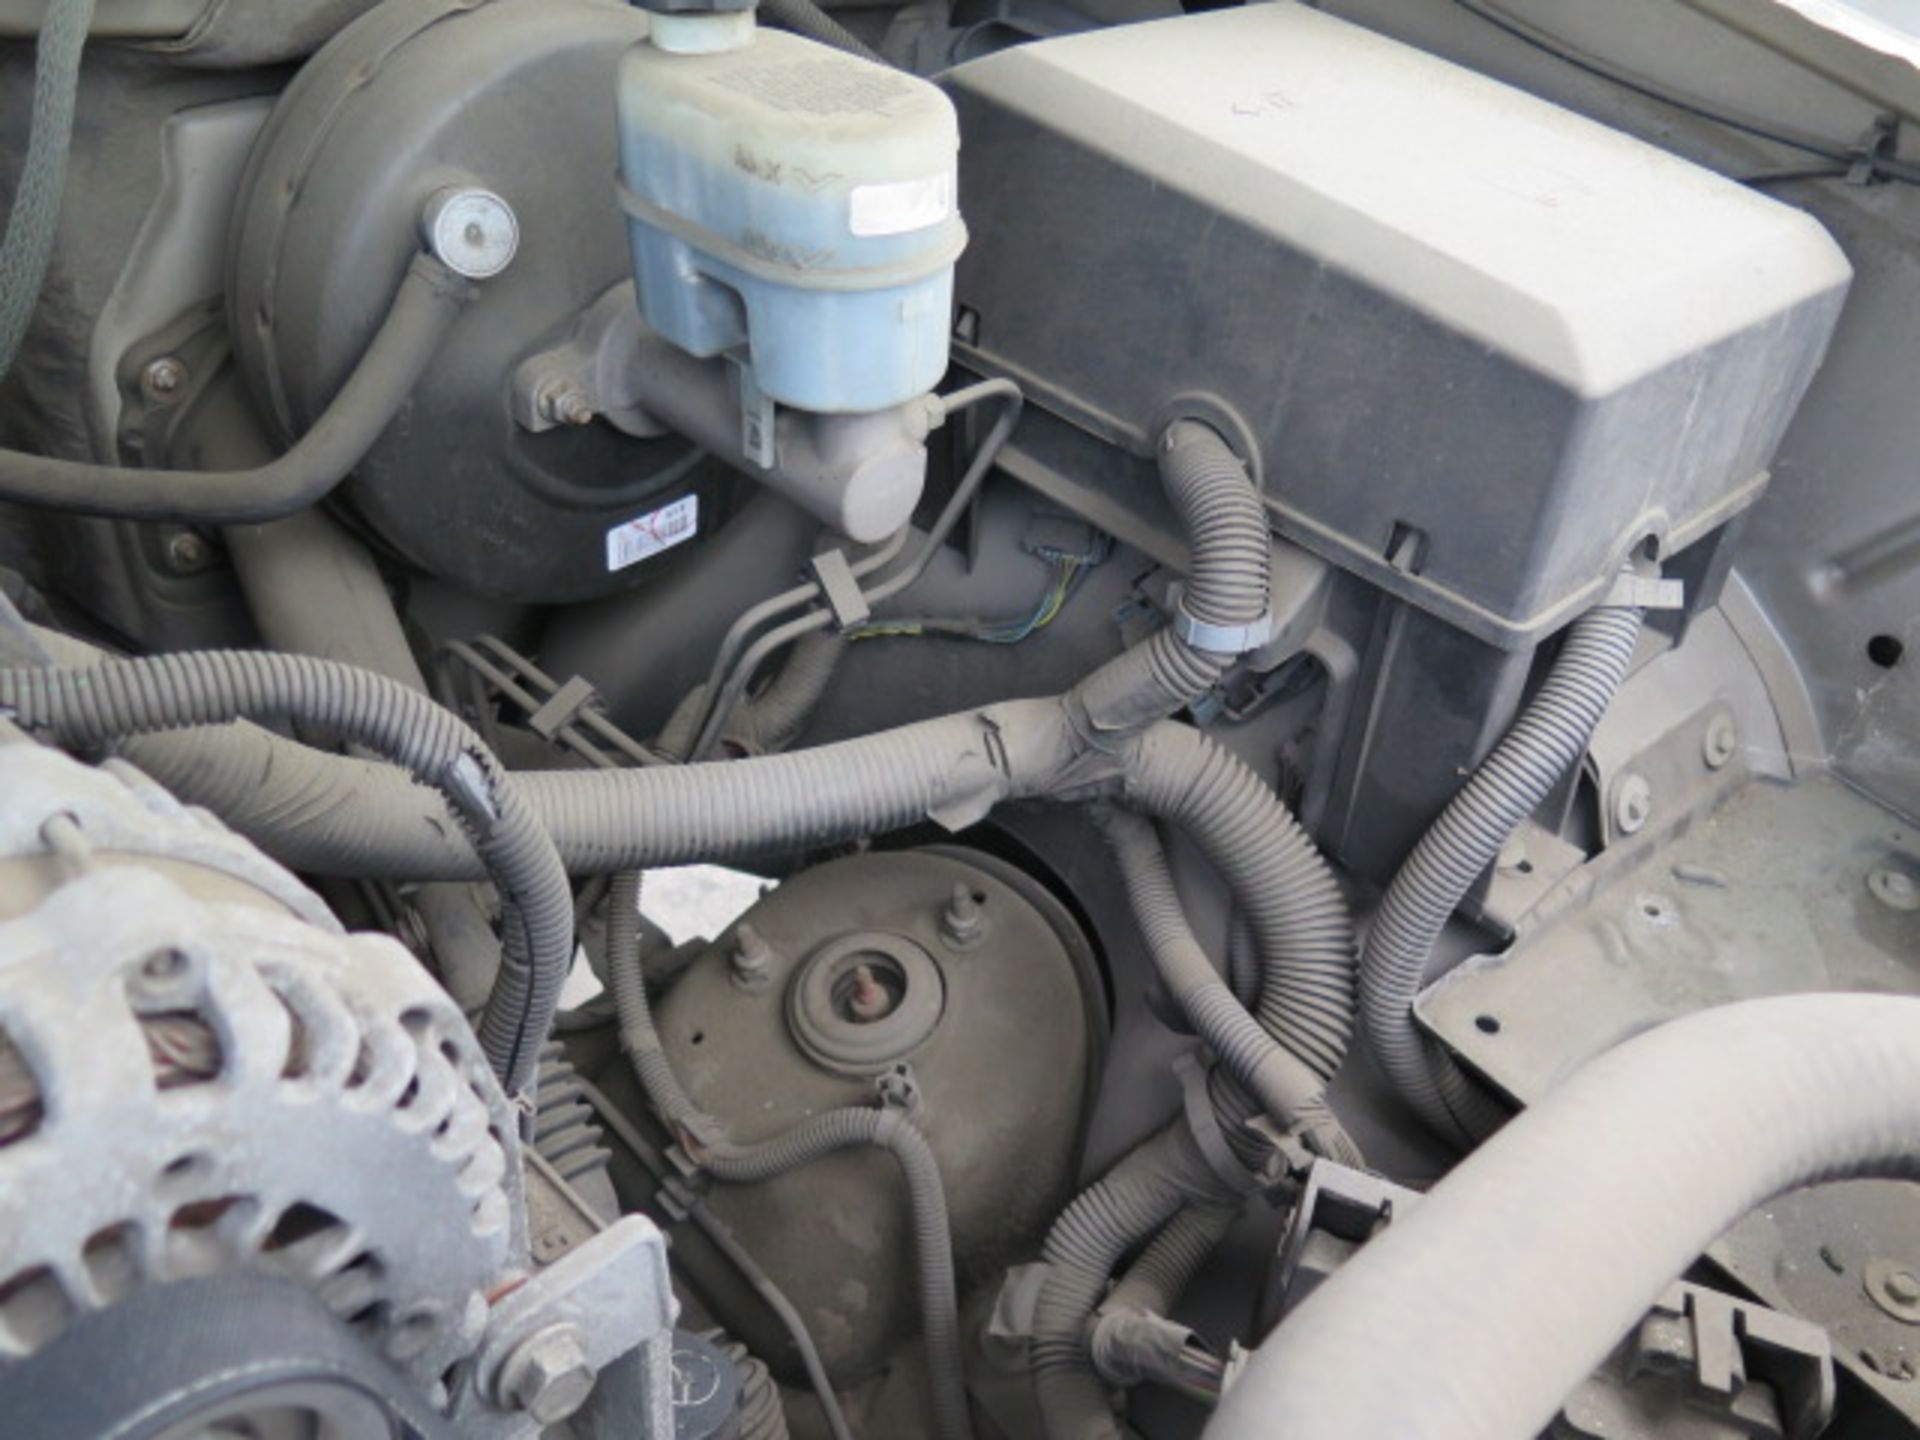 2007 Chevrolet Silverado LT Pickup Truck Lisc# 8M41606 w/ Gas Engine, Automatic Trans, SOLD AS IS - Image 7 of 16